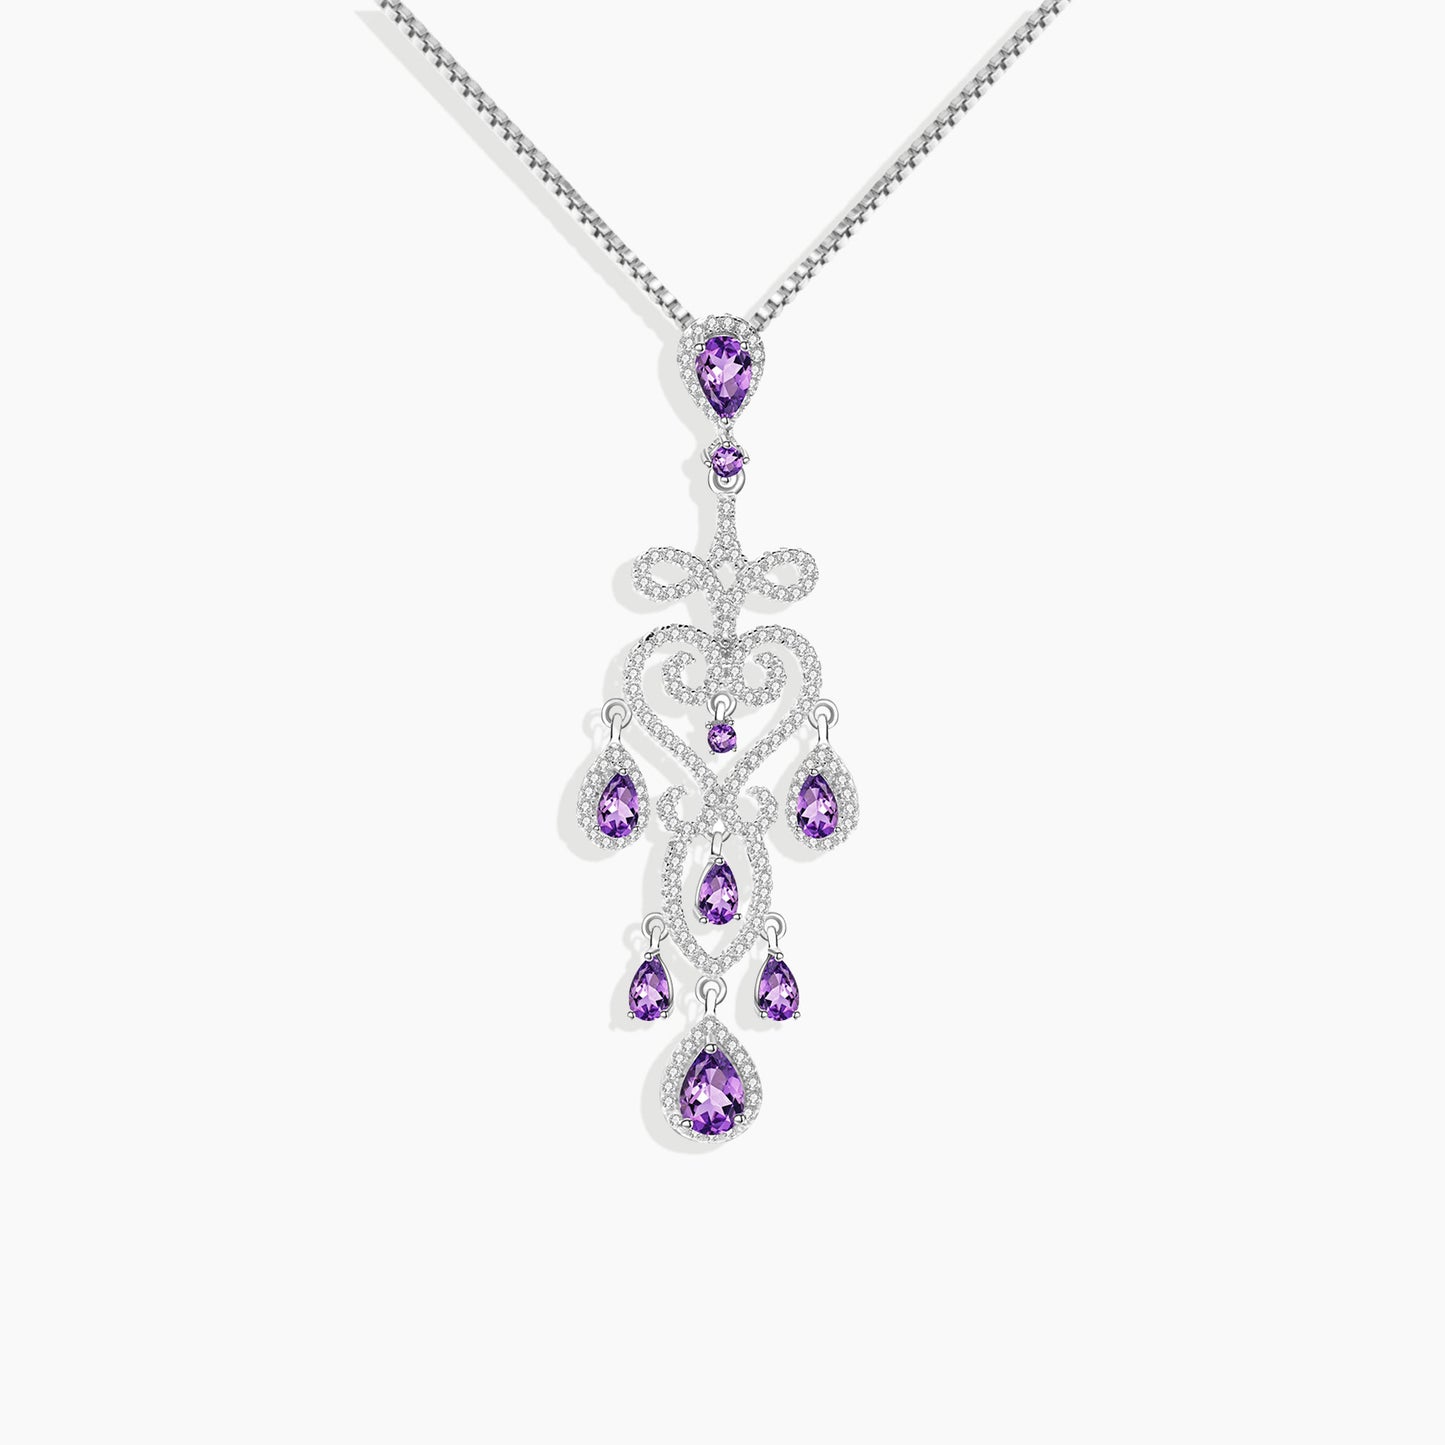 Amethyst Culture Necklace in Sterling Silver